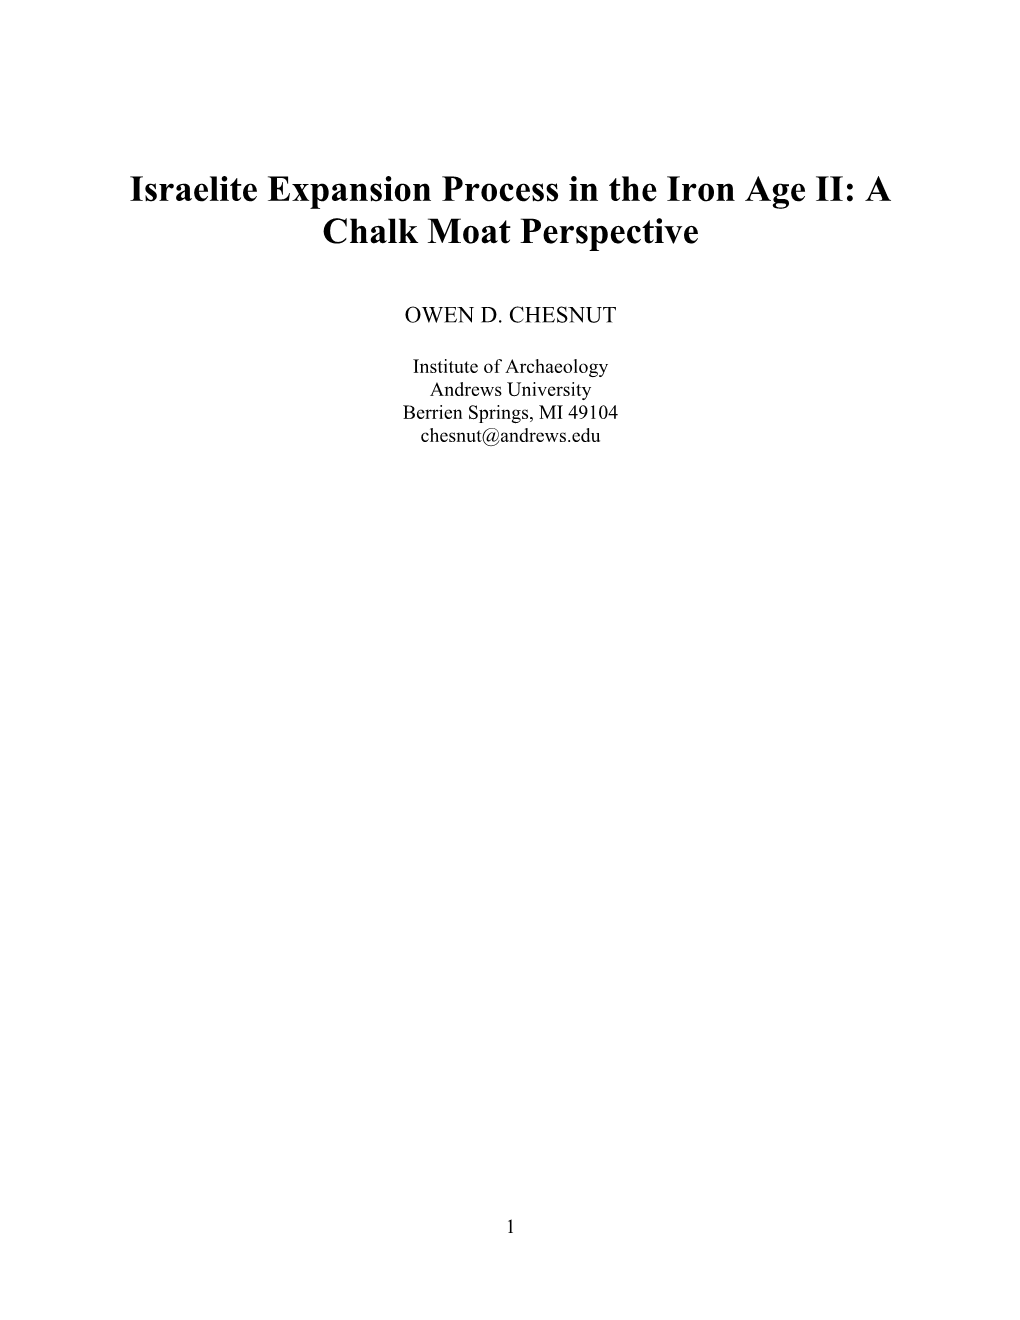 Israelite Expansion Process in the Iron Age II: a Chalk Moat Perspective